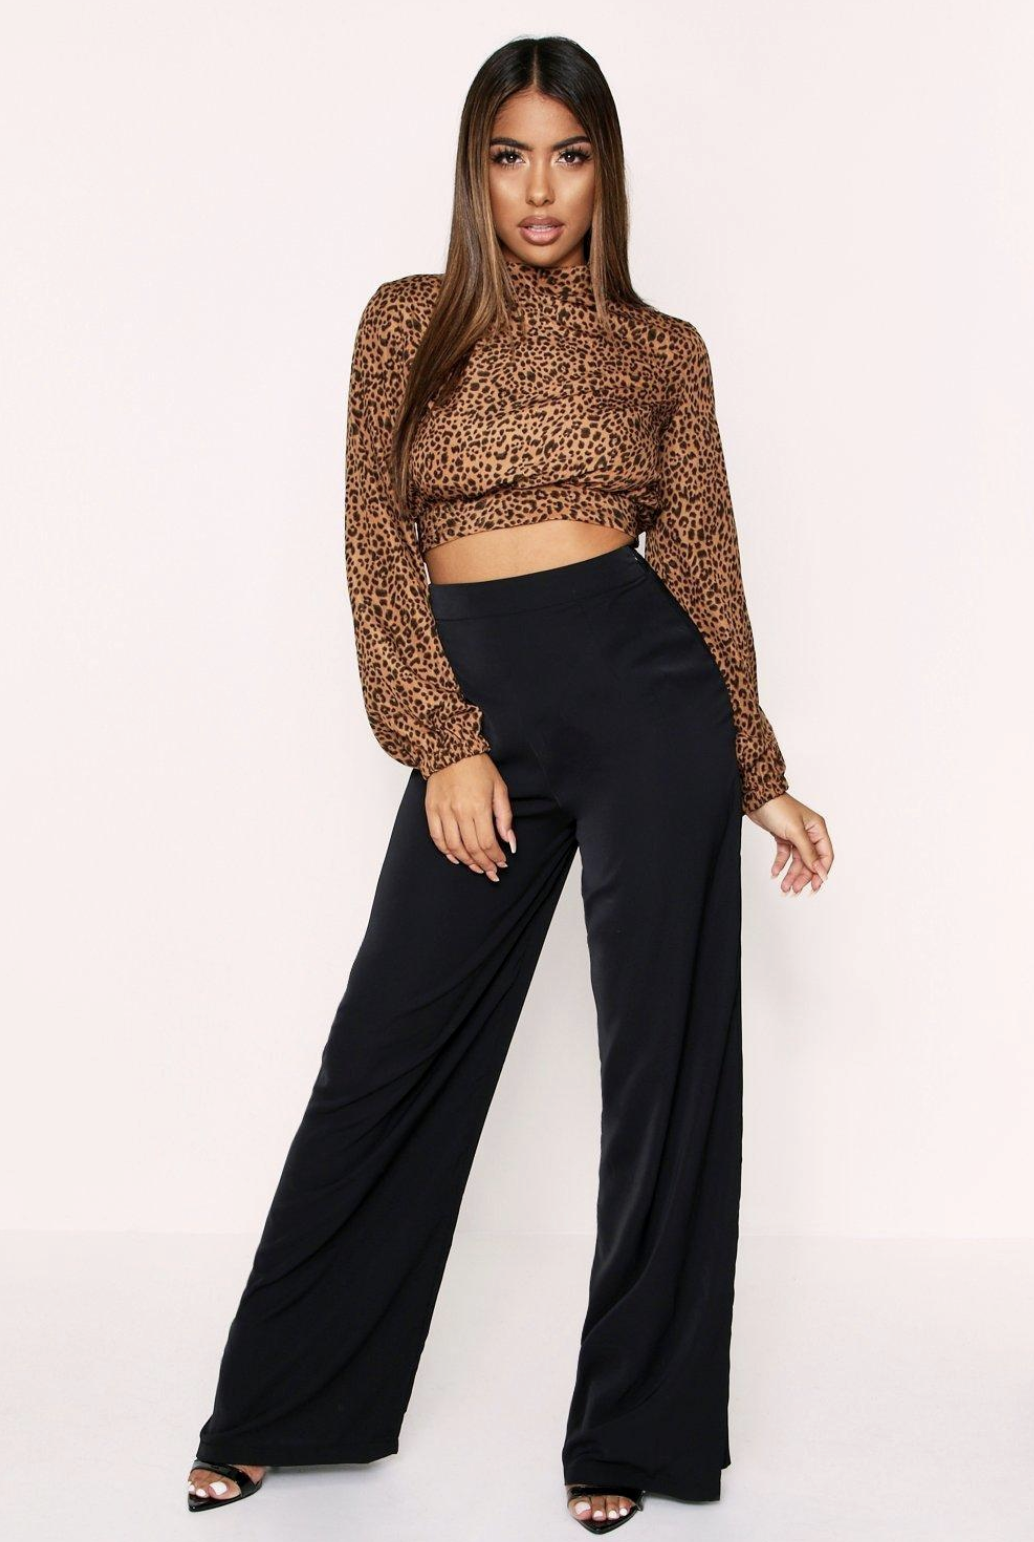 Boohoo Is Having A Sale Right Now And I'm Just Saying, Some Of Their ...